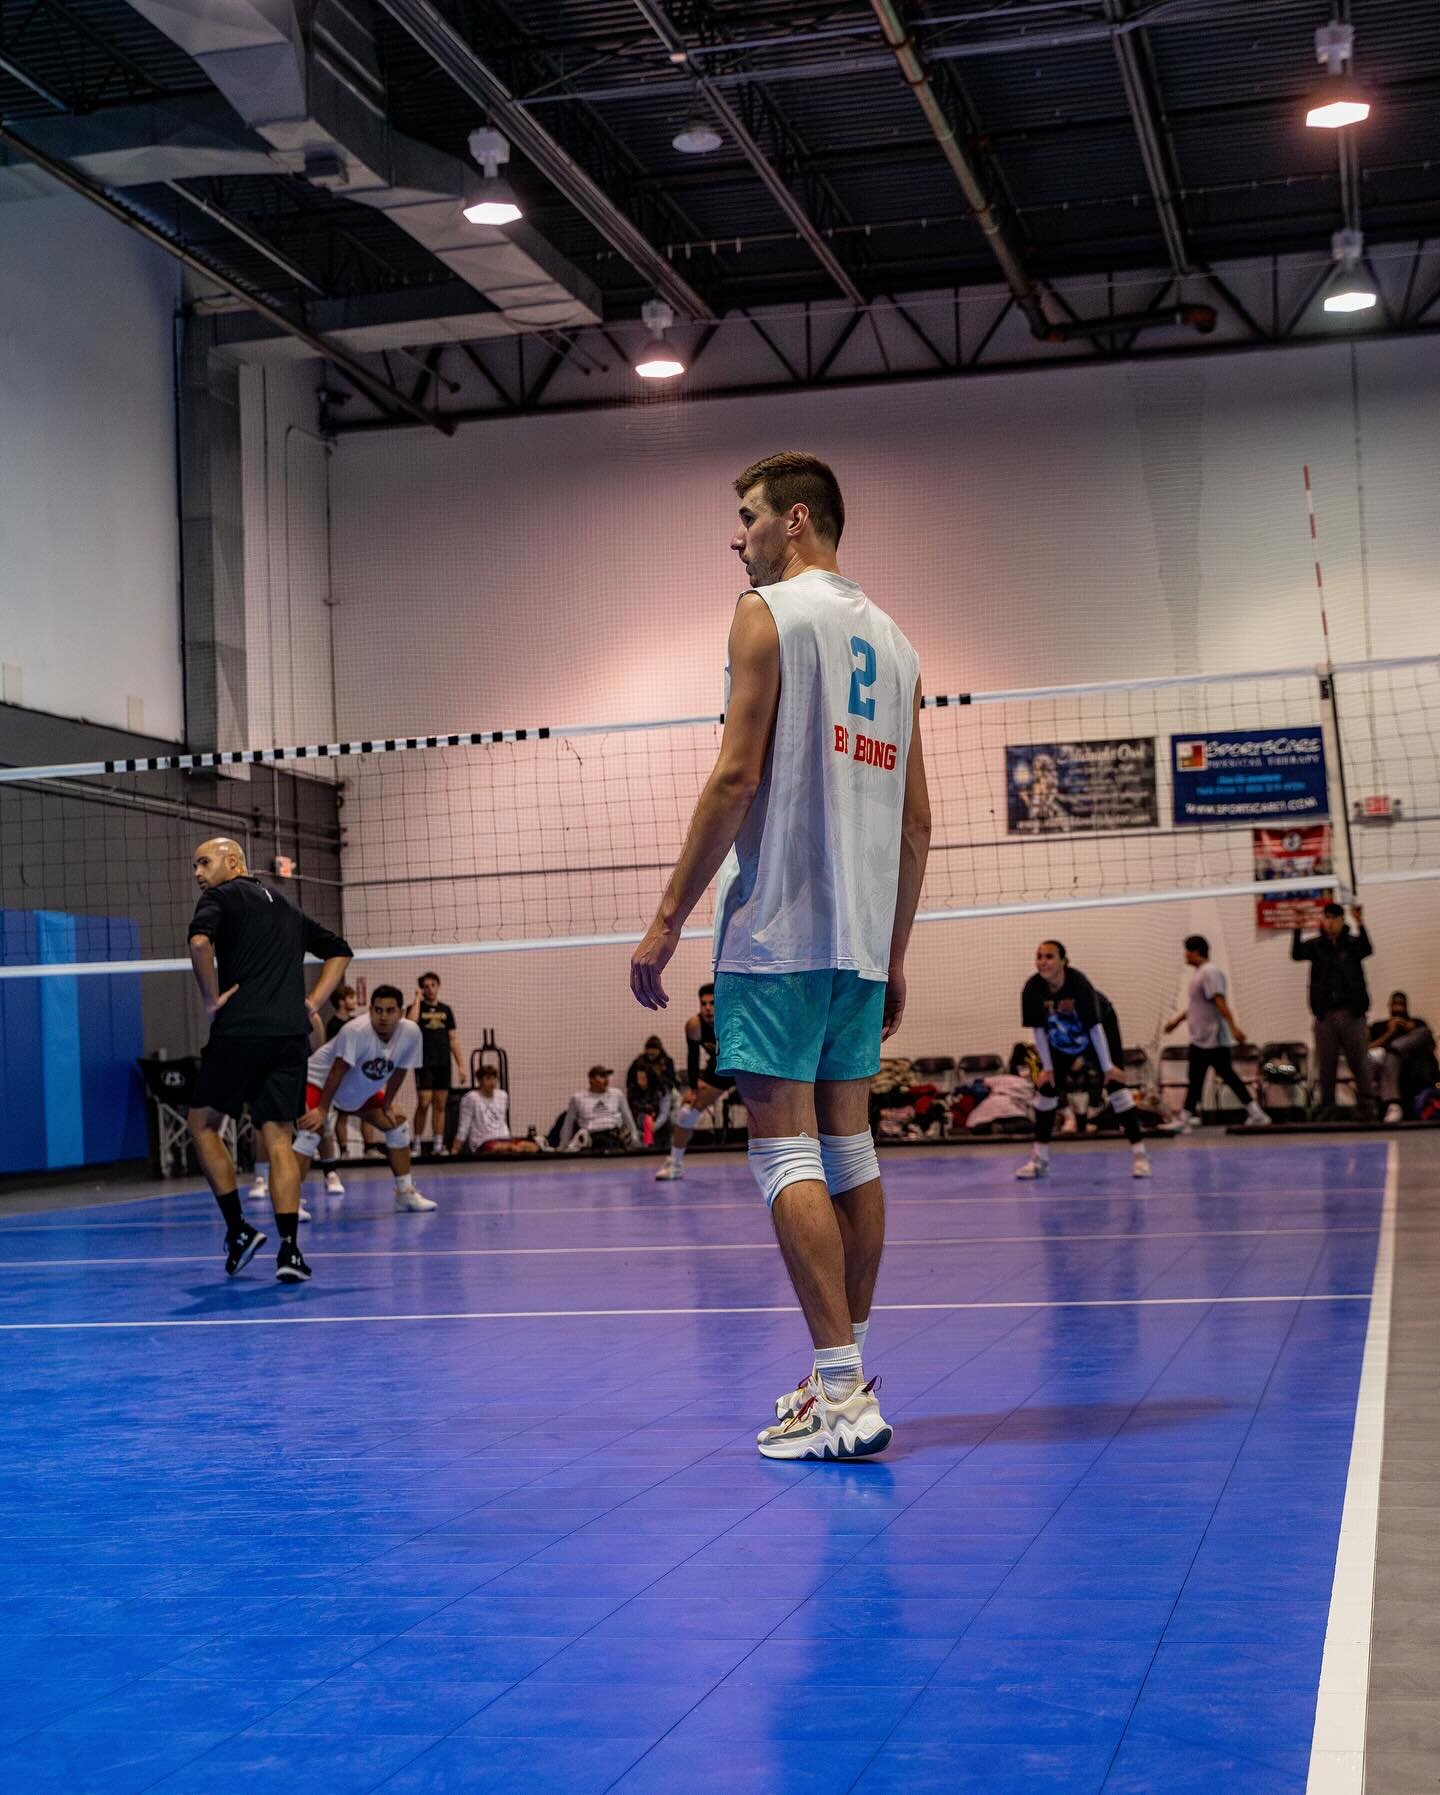 Shots of my homies getting UP ✈️ from last week&rsquo;s twilight tournament 🏐🔥@stickle_ @billple 🚀
Great night of some fun volleyball! Thanks again @gsevolleyball #sportsphotography #volleyballlife